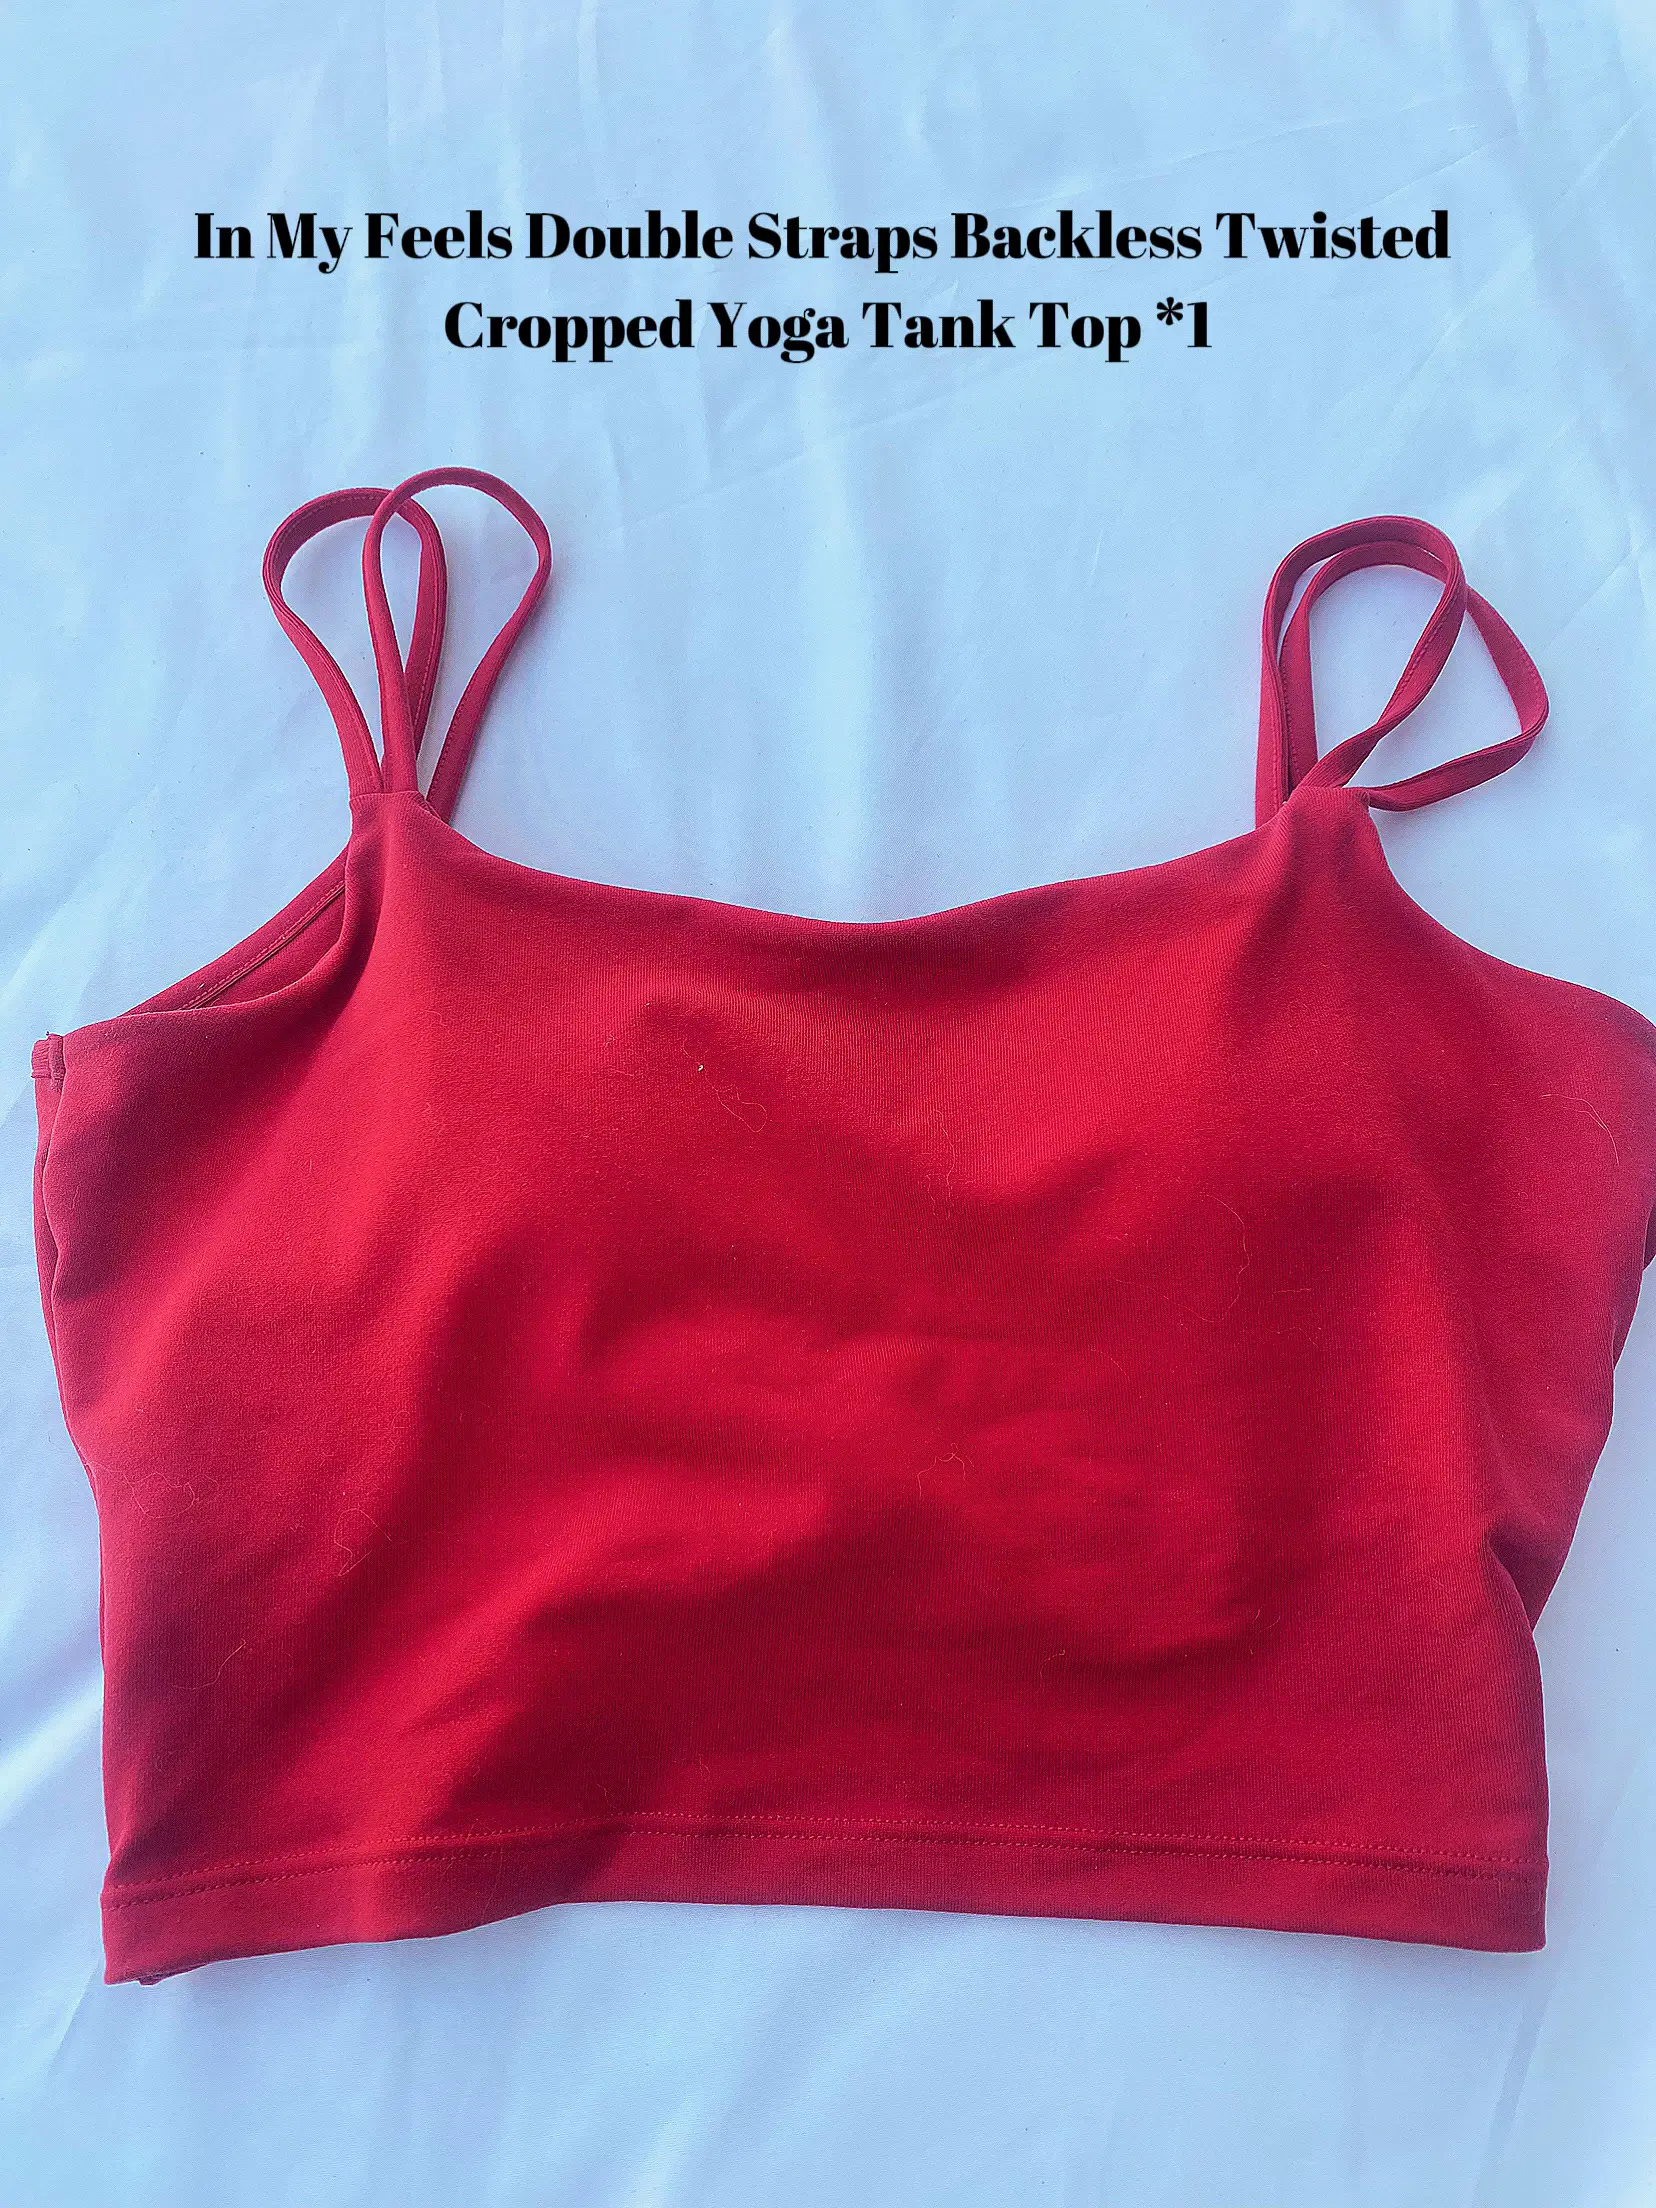 HALARA WORKOUT TOPS REVIEW, Gallery posted by Lexirosenstein